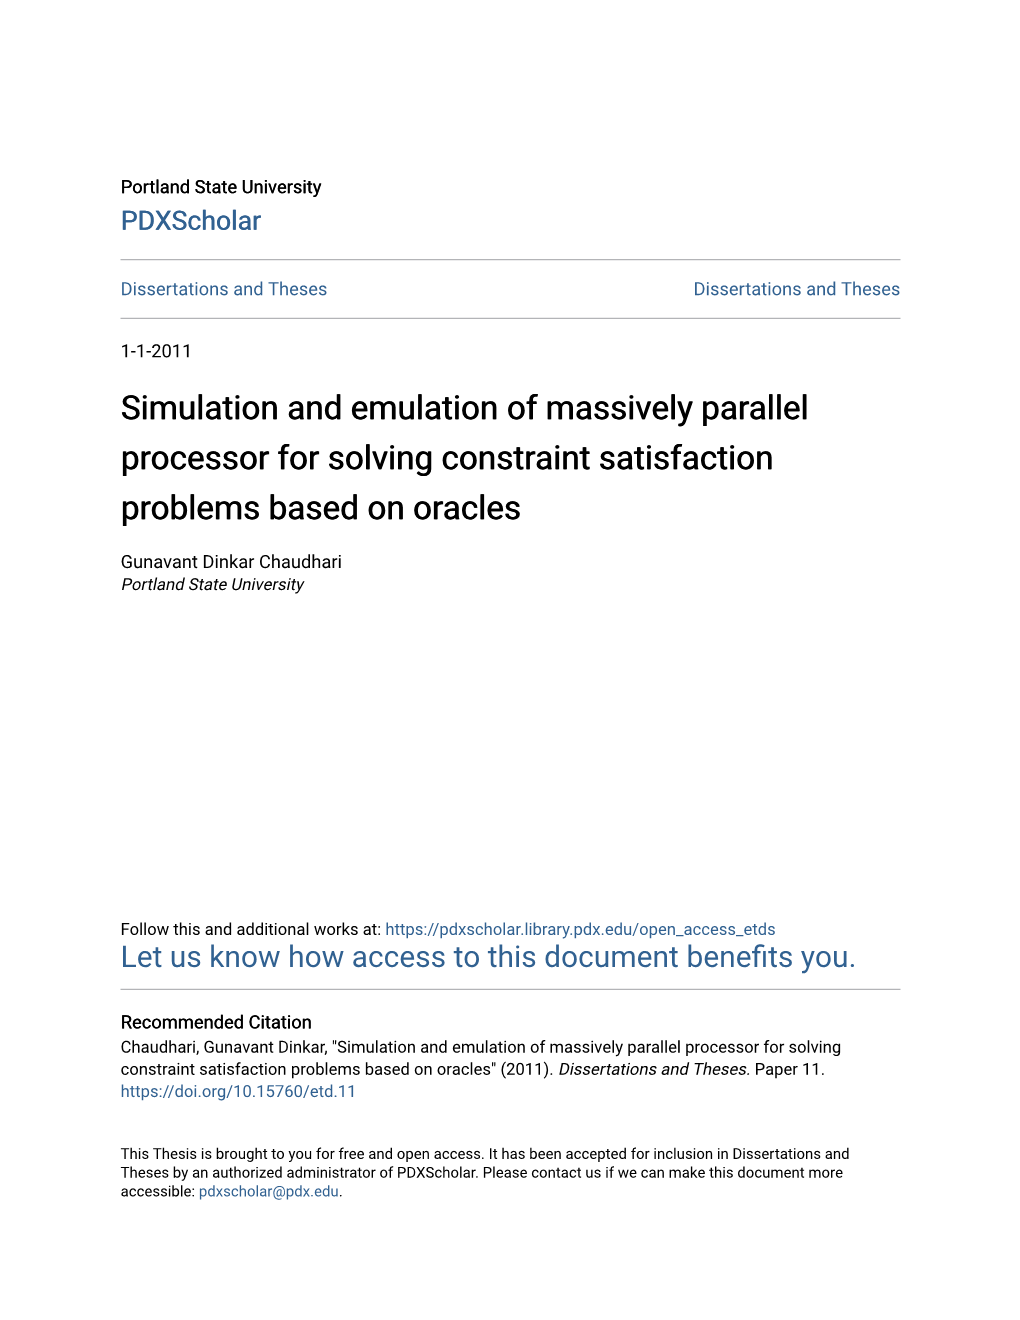 Simulation and Emulation of Massively Parallel Processor for Solving Constraint Satisfaction Problems Based on Oracles